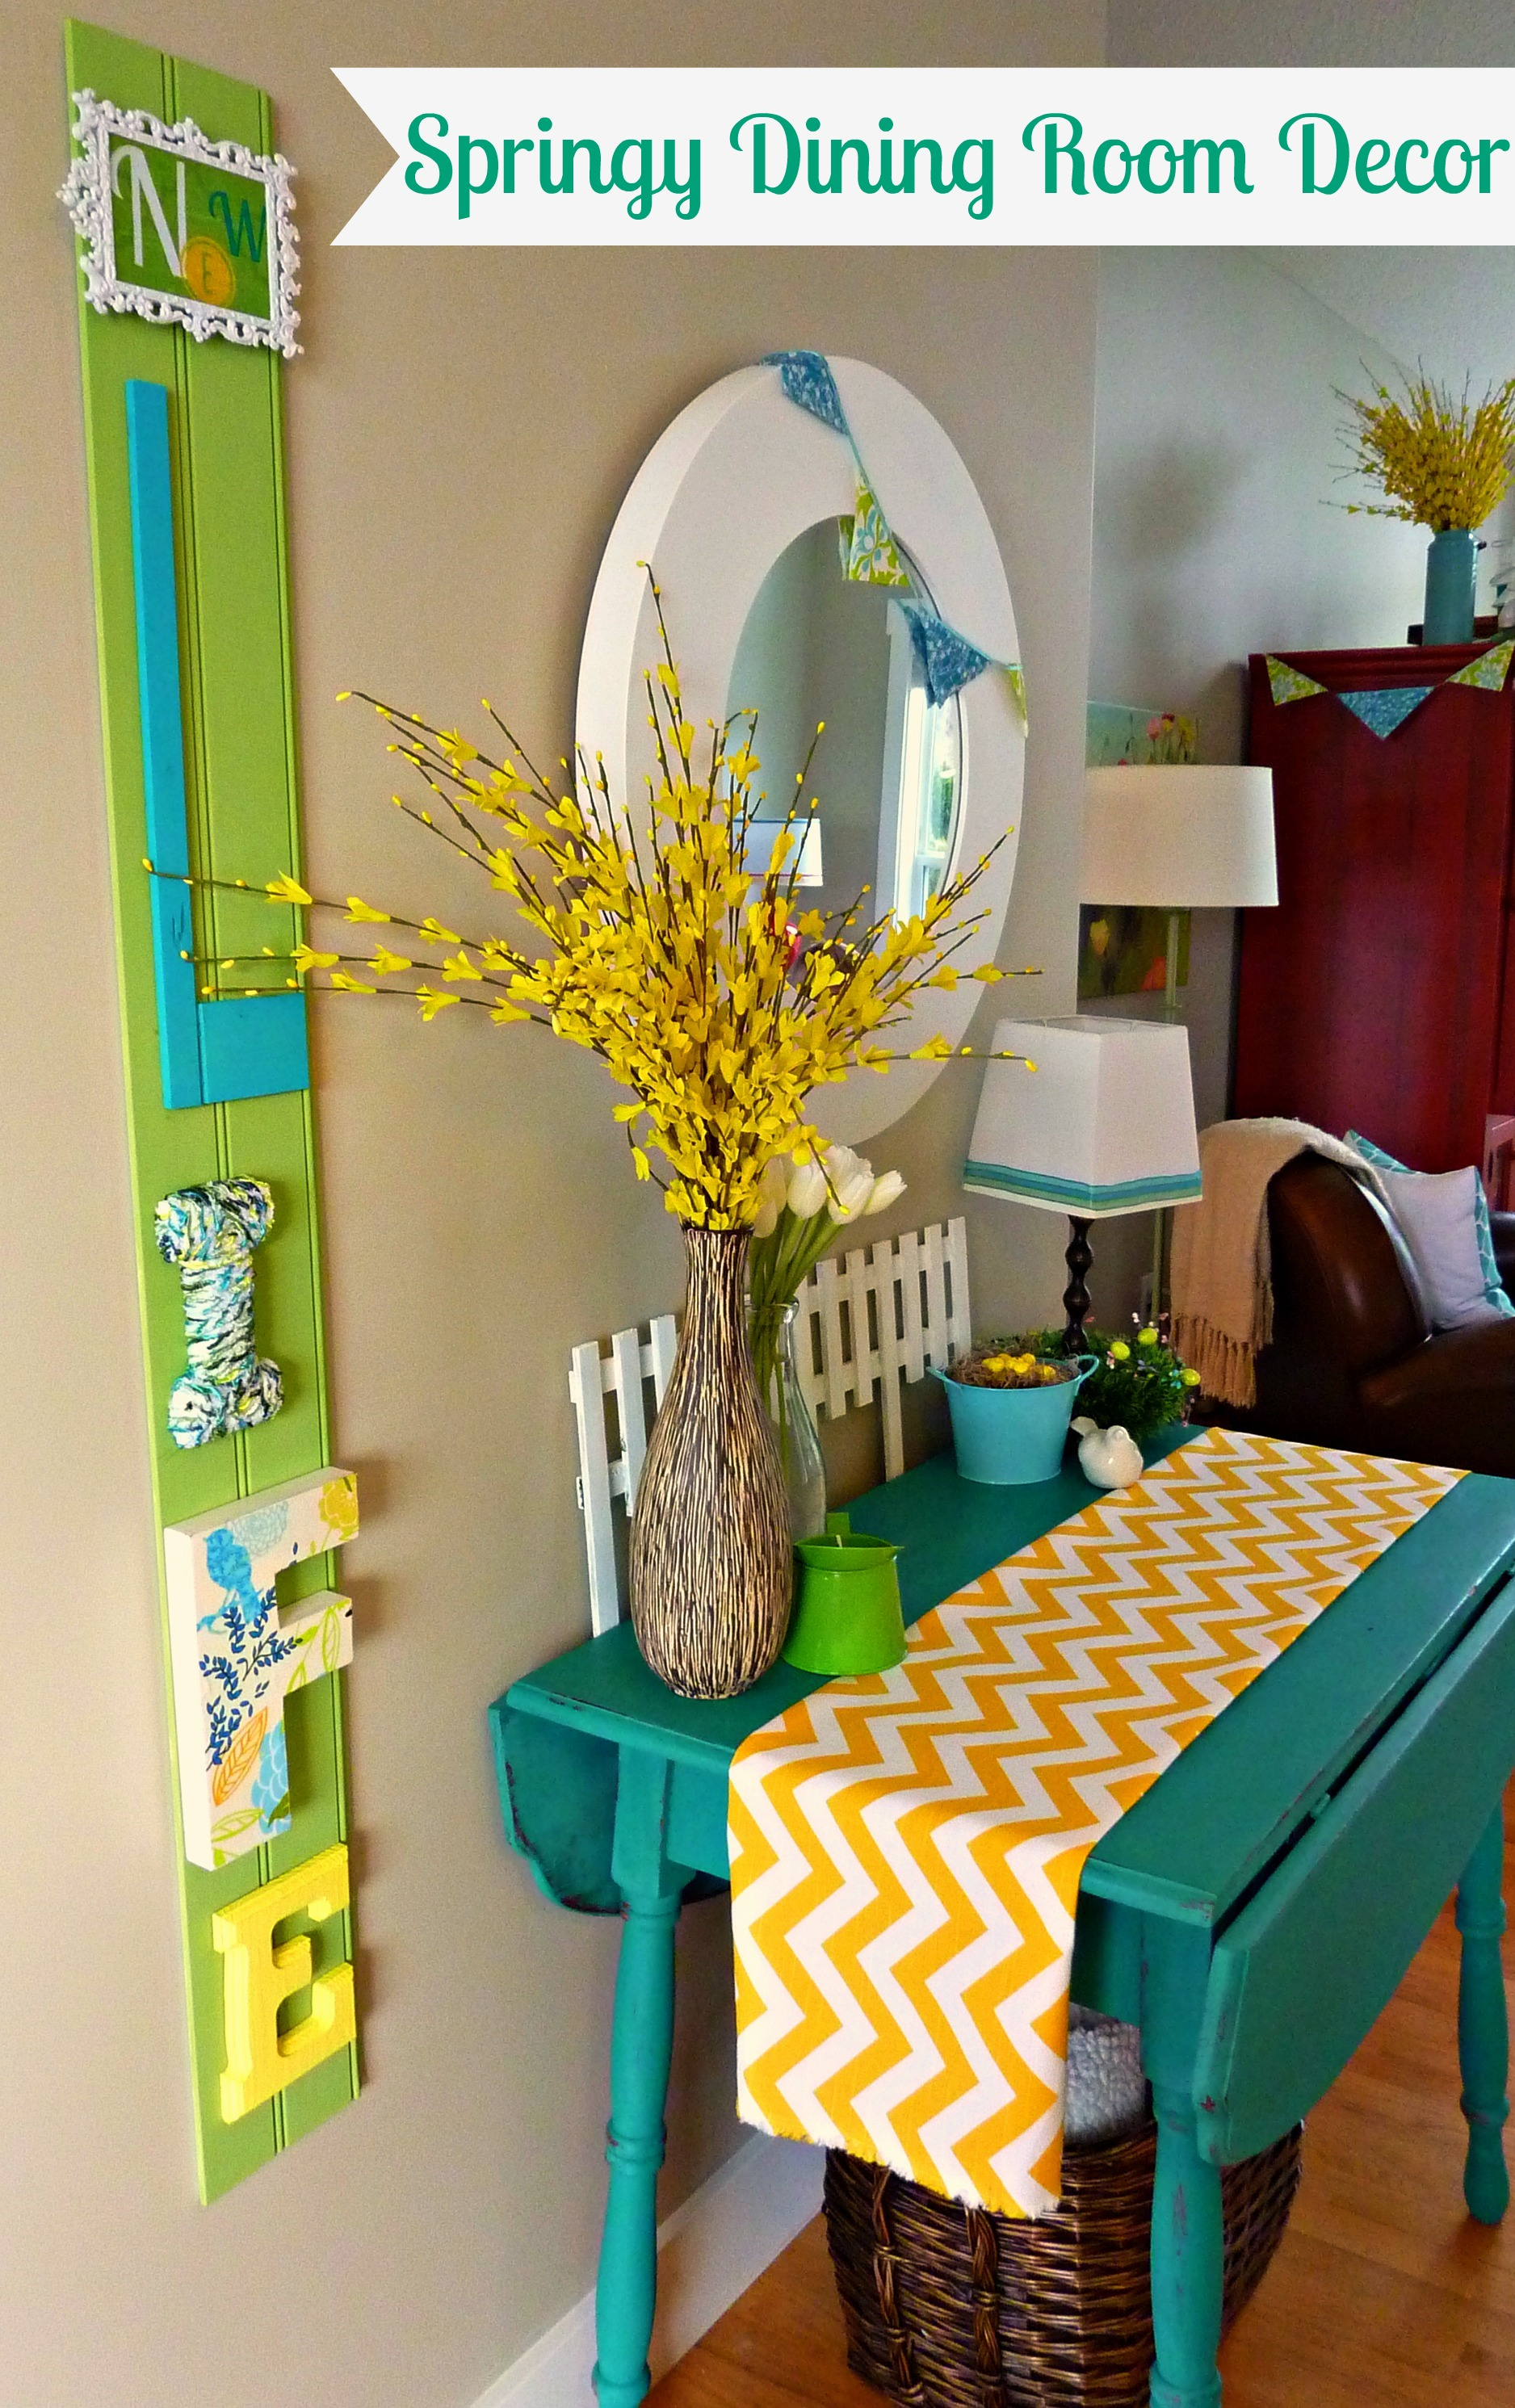 Decorating: Welcome Spring In the Dining Room